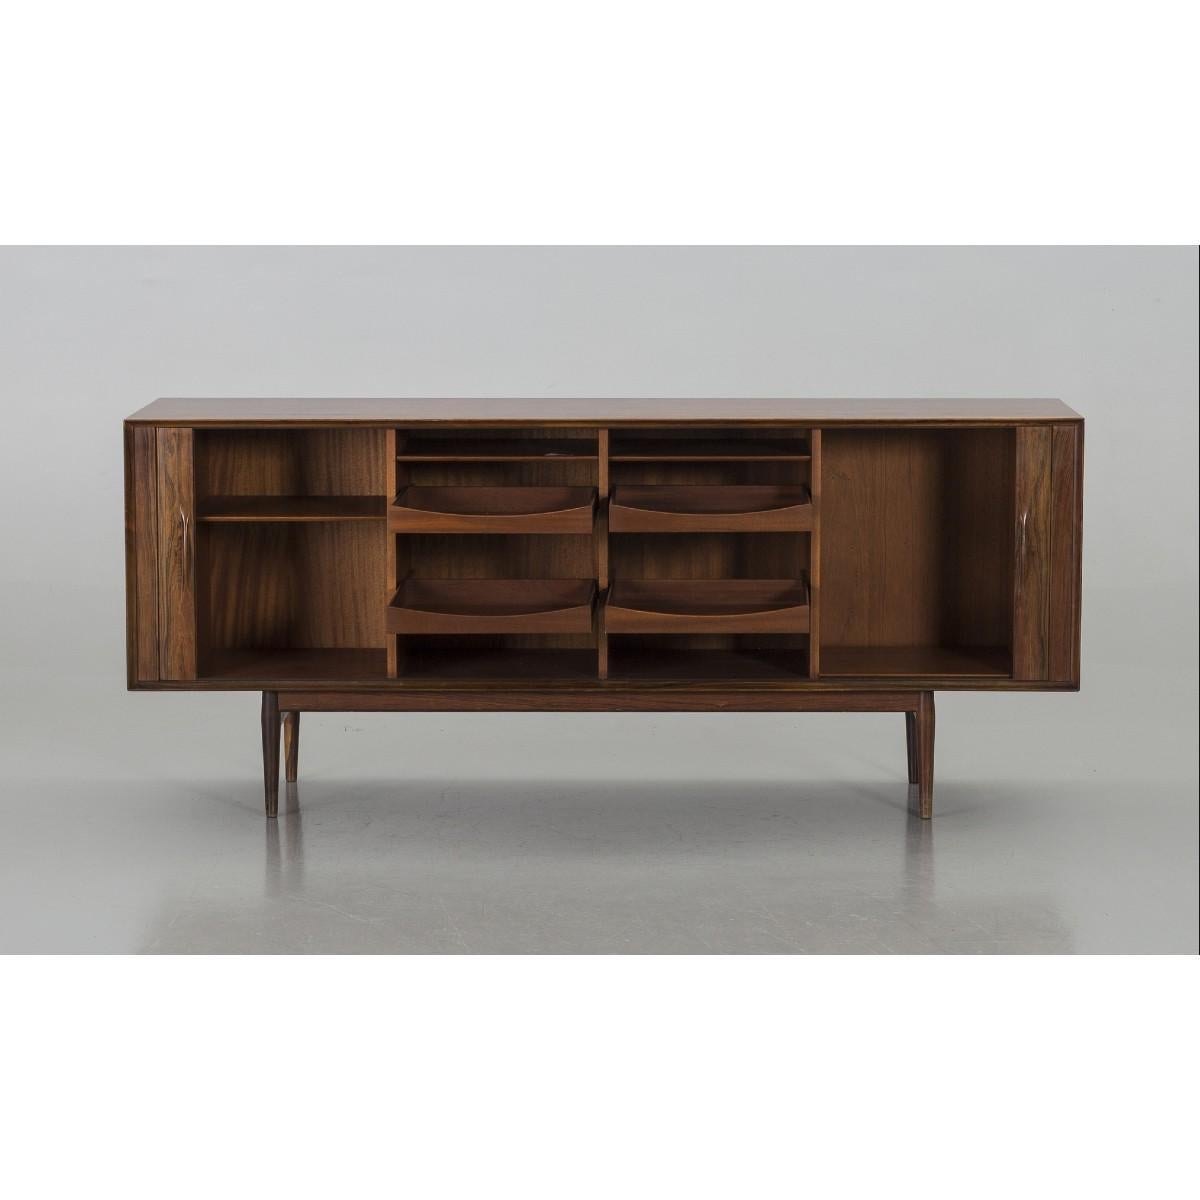 A sideboard of model 75 designed by the Danish designer Arne Vodder and produced at Sibast Møbelfabrik in Denmark. The sideboard was designed probably in the late 1950s-in the early 1960s. The sideboard is made in Brazilian rosewood and comes with a